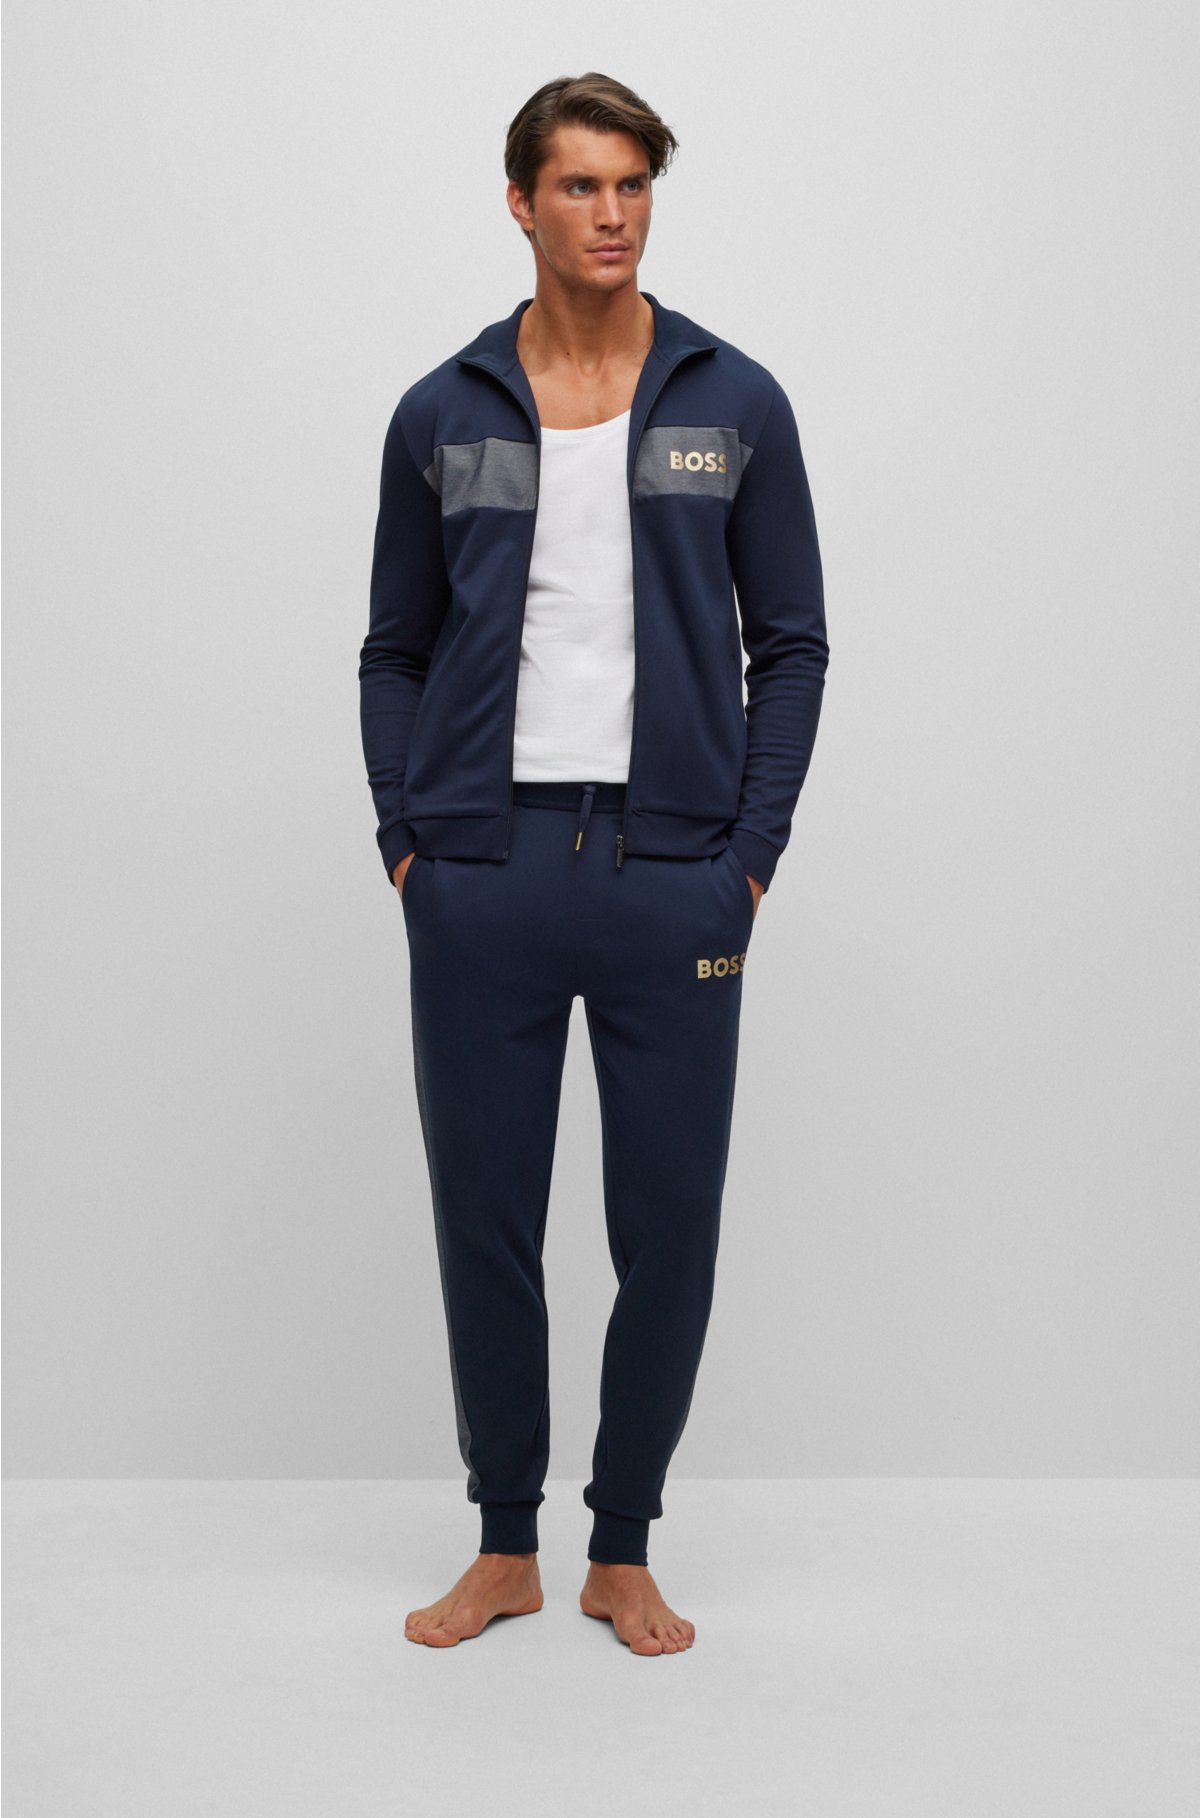 BOSS logo with - Sweatpants embroidered